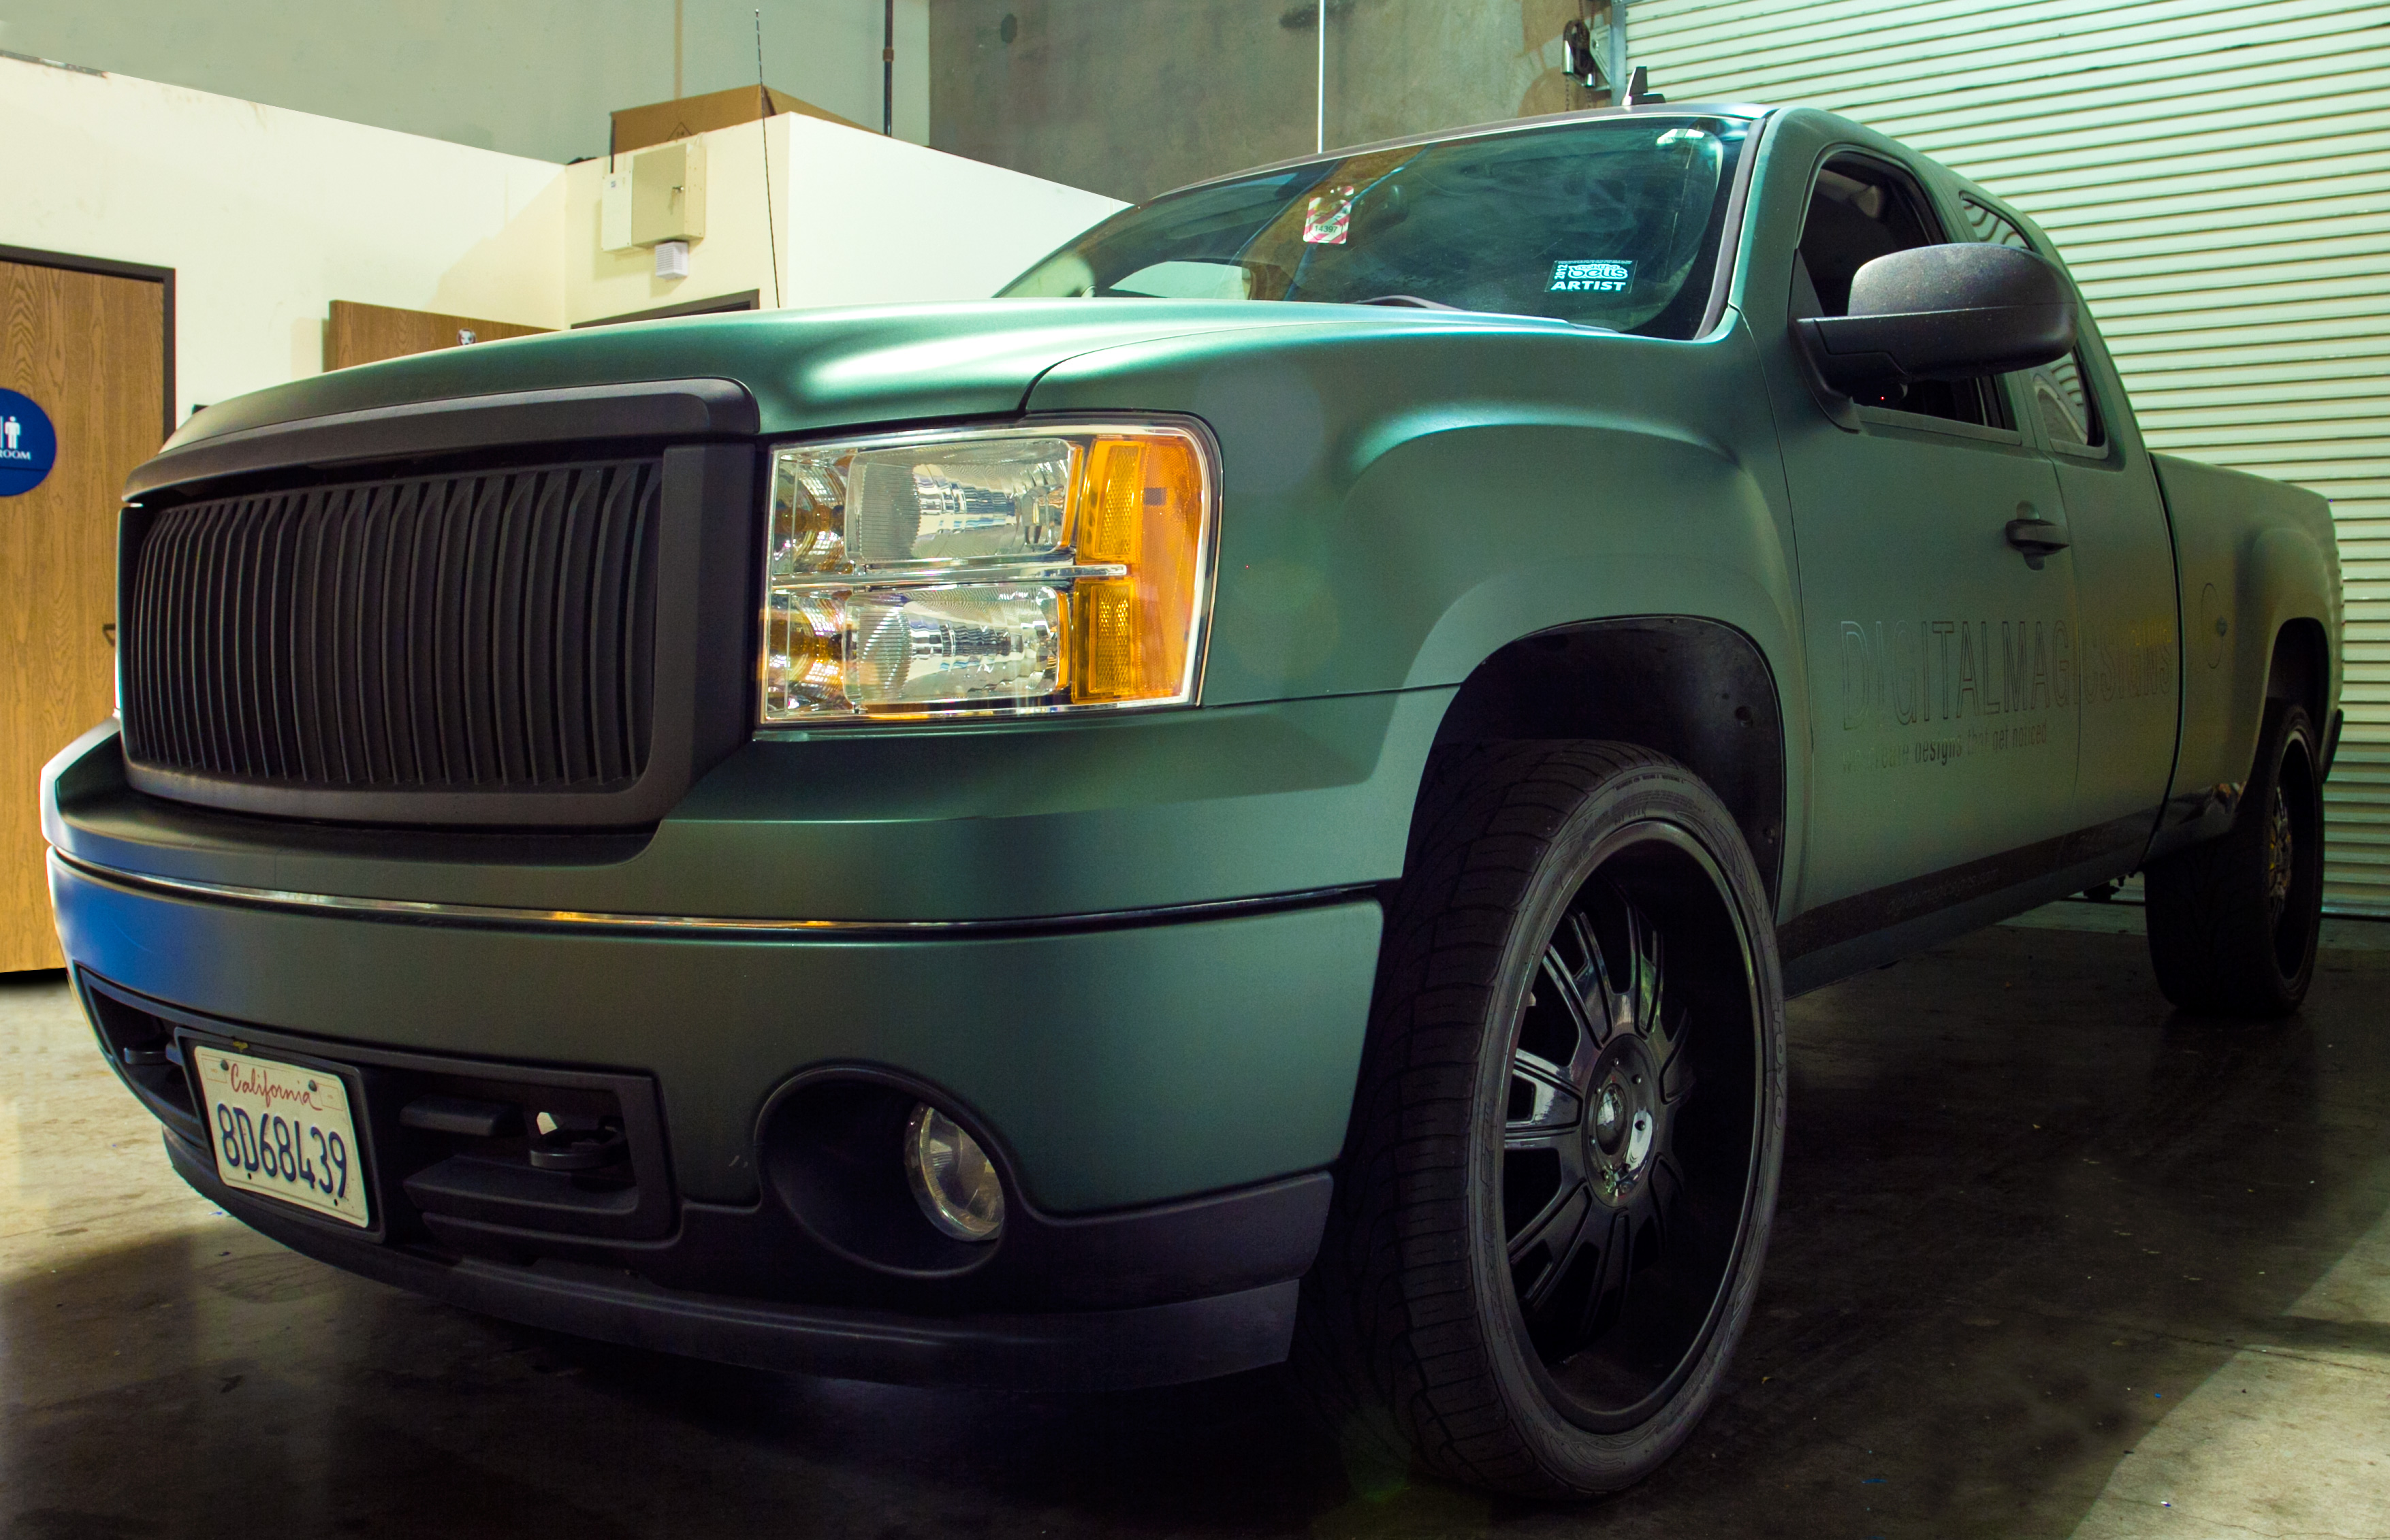 Green Truck Vehicle Restyling